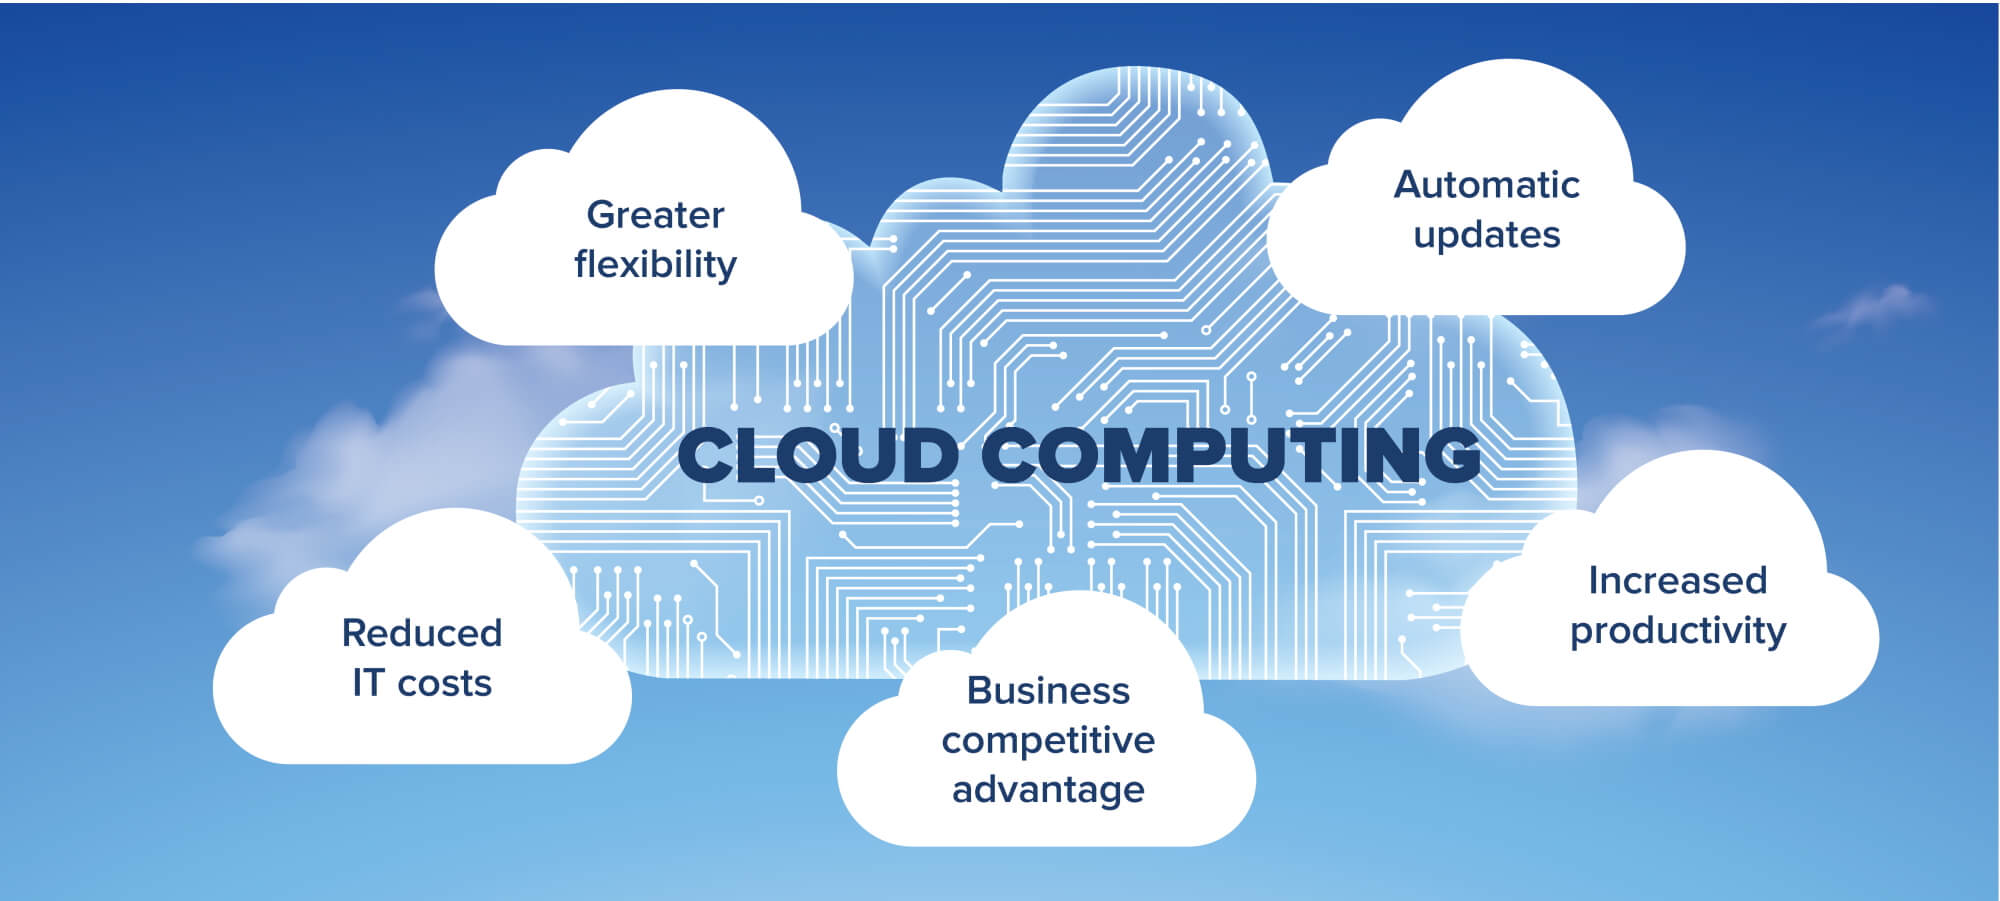 "Everything You Need to Know About Cloud Computing - Image 5"